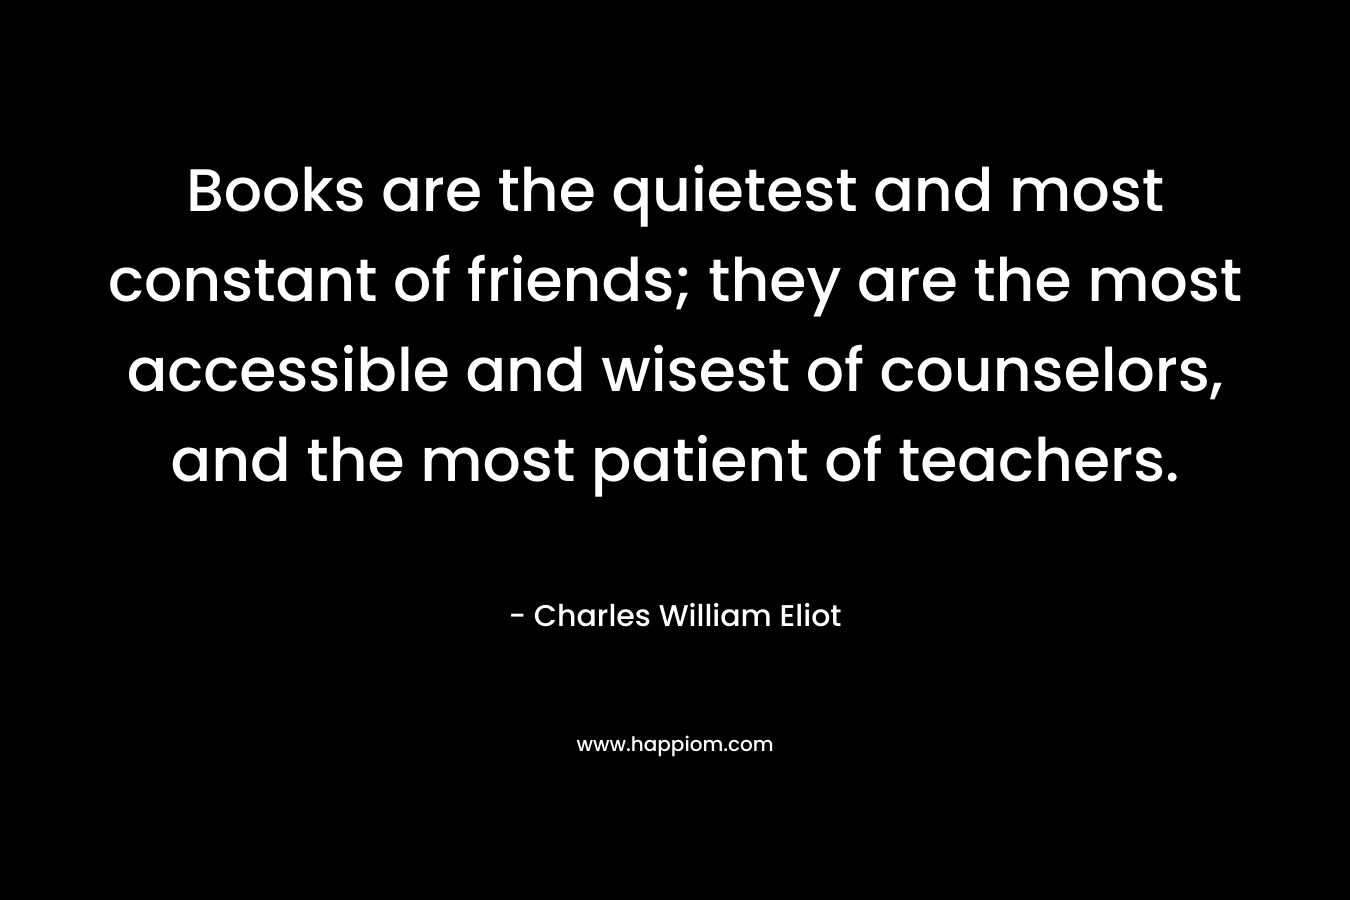 Books are the quietest and most constant of friends; they are the most accessible and wisest of counselors, and the most patient of teachers. – Charles William Eliot